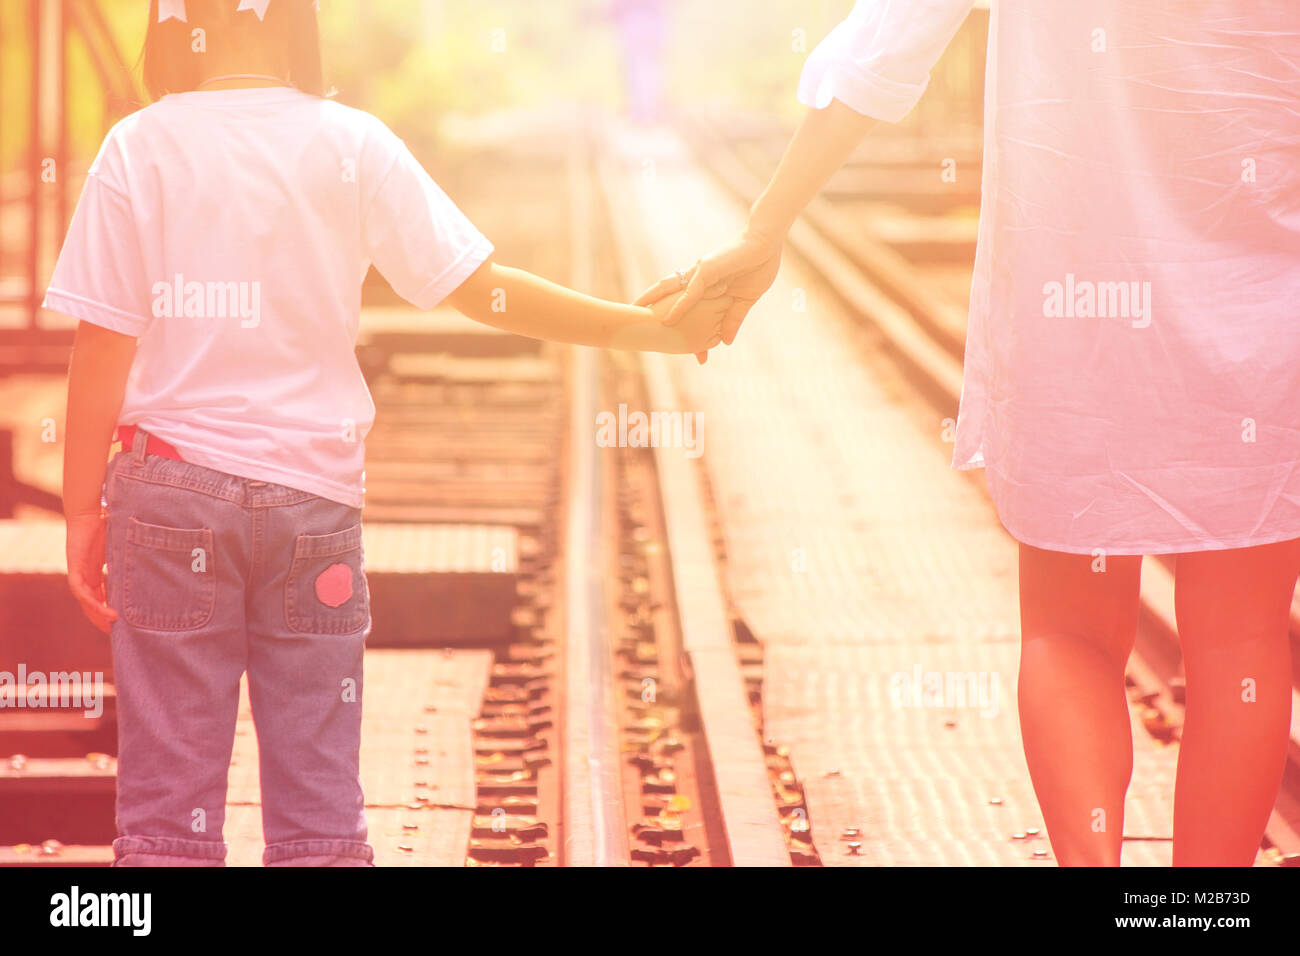 Adorable Family Concept : Woman and children walking on railroad tracks and holding hand together with sun flare background. Stock Photo